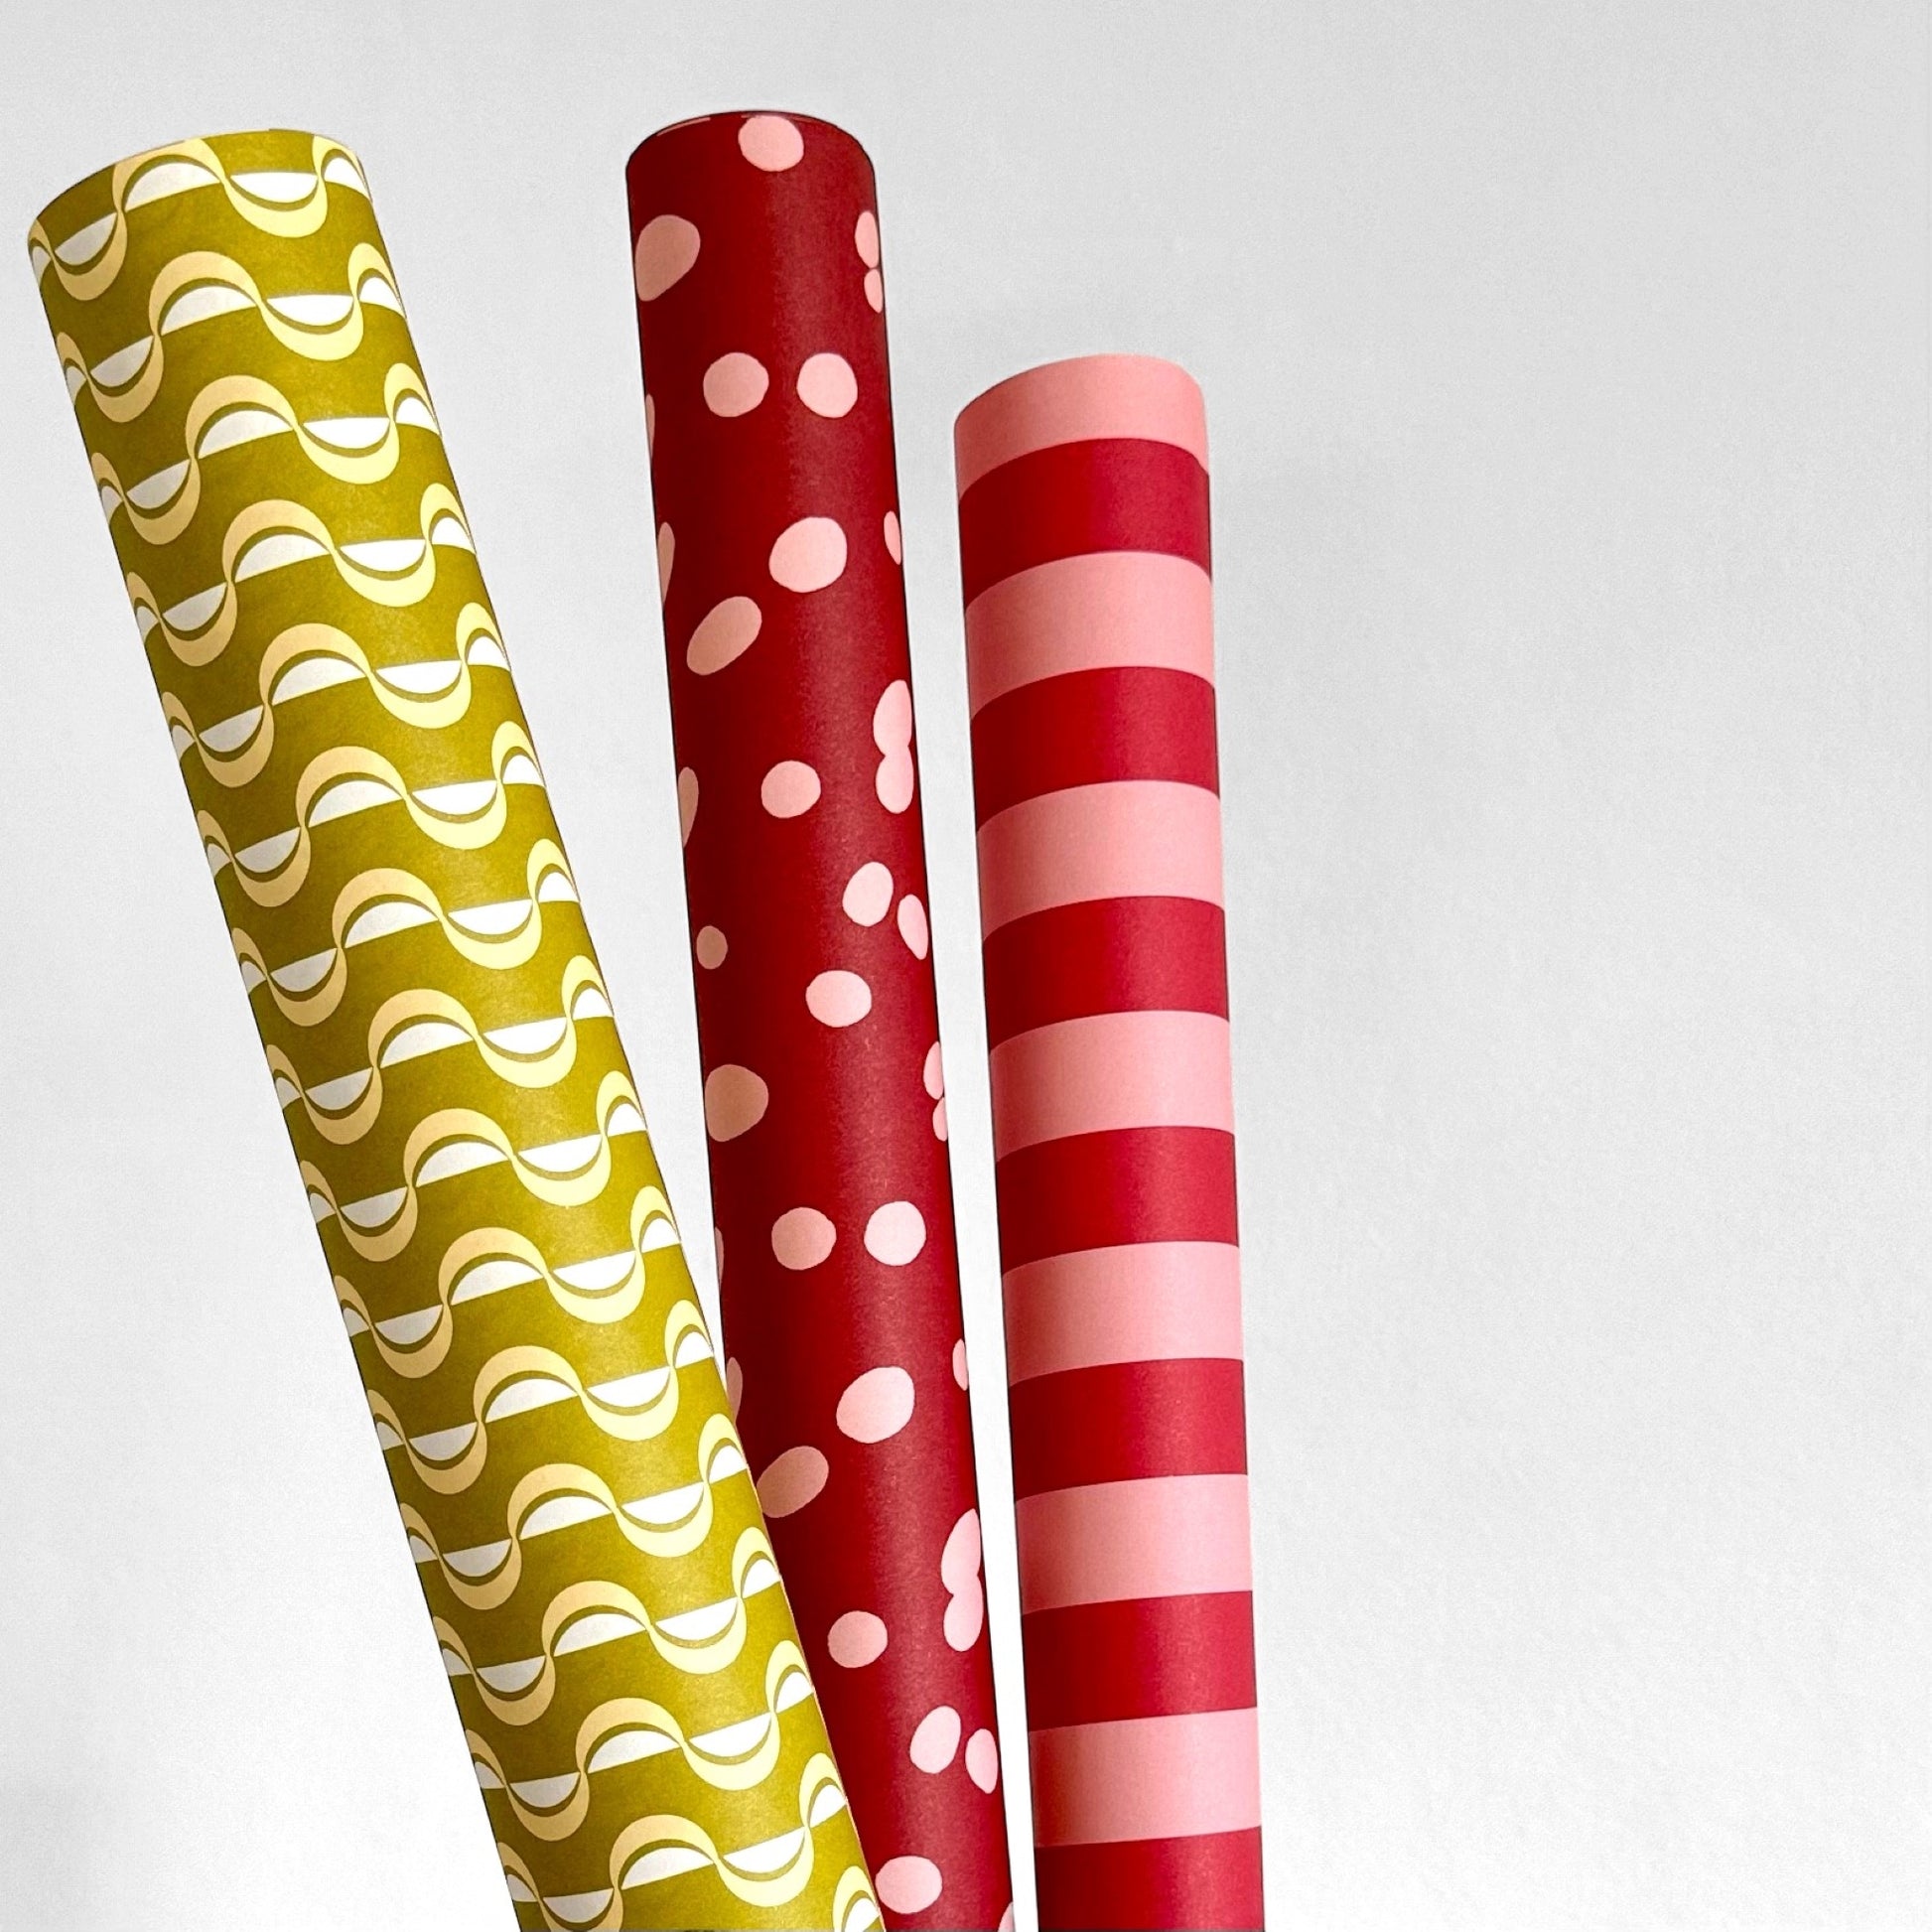 wrapping paper by ola studio with a wavy stripe design in chartreuse and lemon. Pictured rolled alongside red patterned papers.